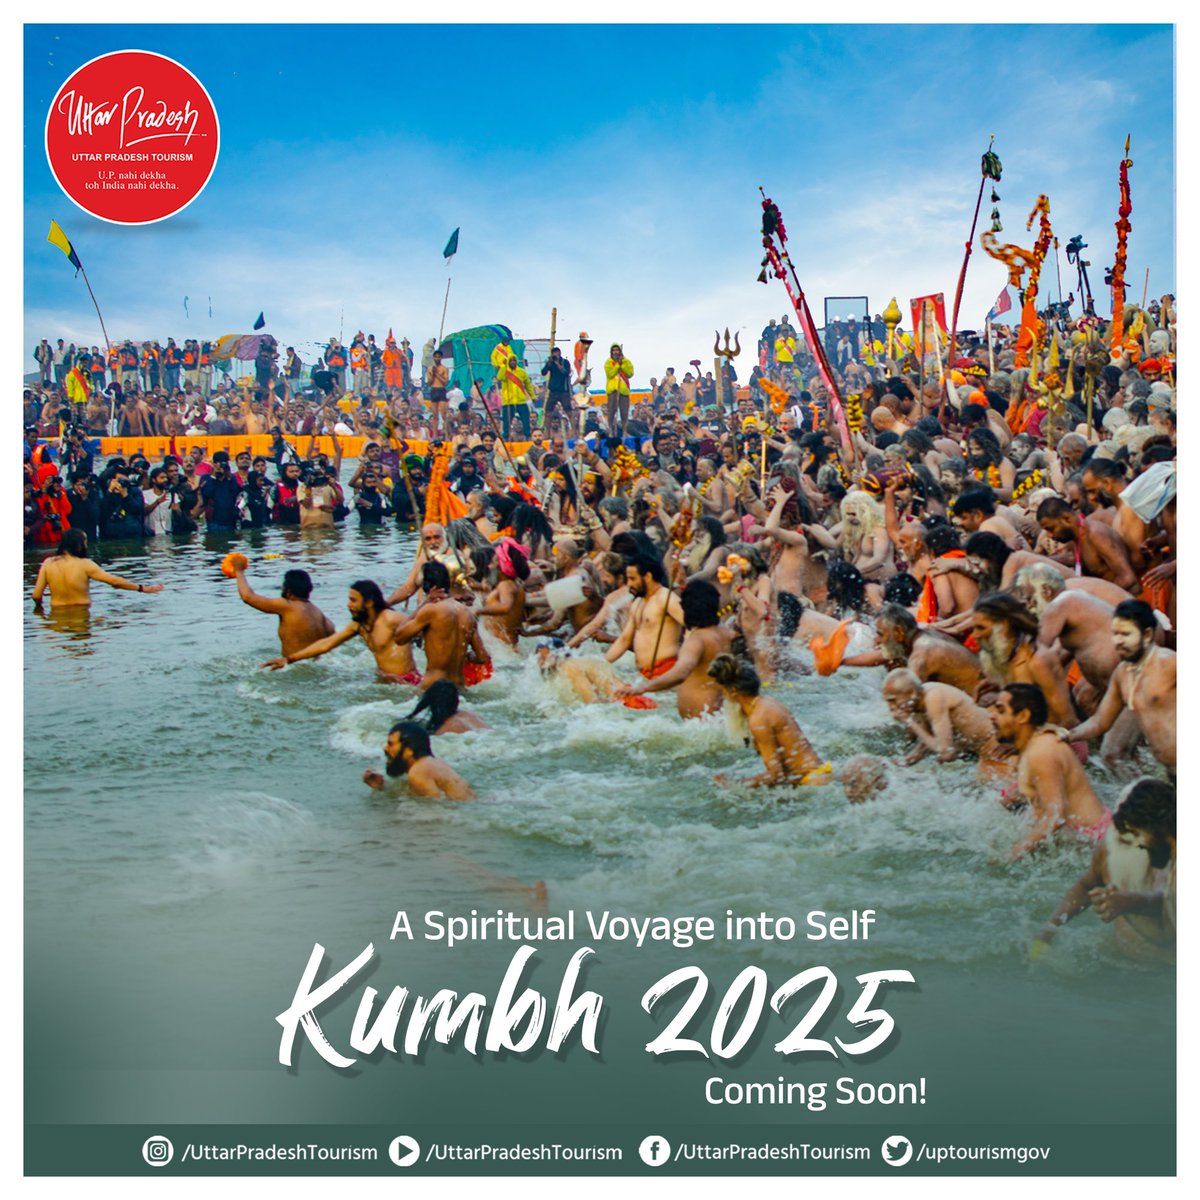 Famous for the confluence of three rivers (#Ganges, #Yamuna, and #Saraswati), known as #TriveniSangam, #Prayagraj hosts the #KumbhMela, one of the largest religious gatherings in the world. The event attracts millions of devotees. Are you preparing for the #spiritual sojourn?